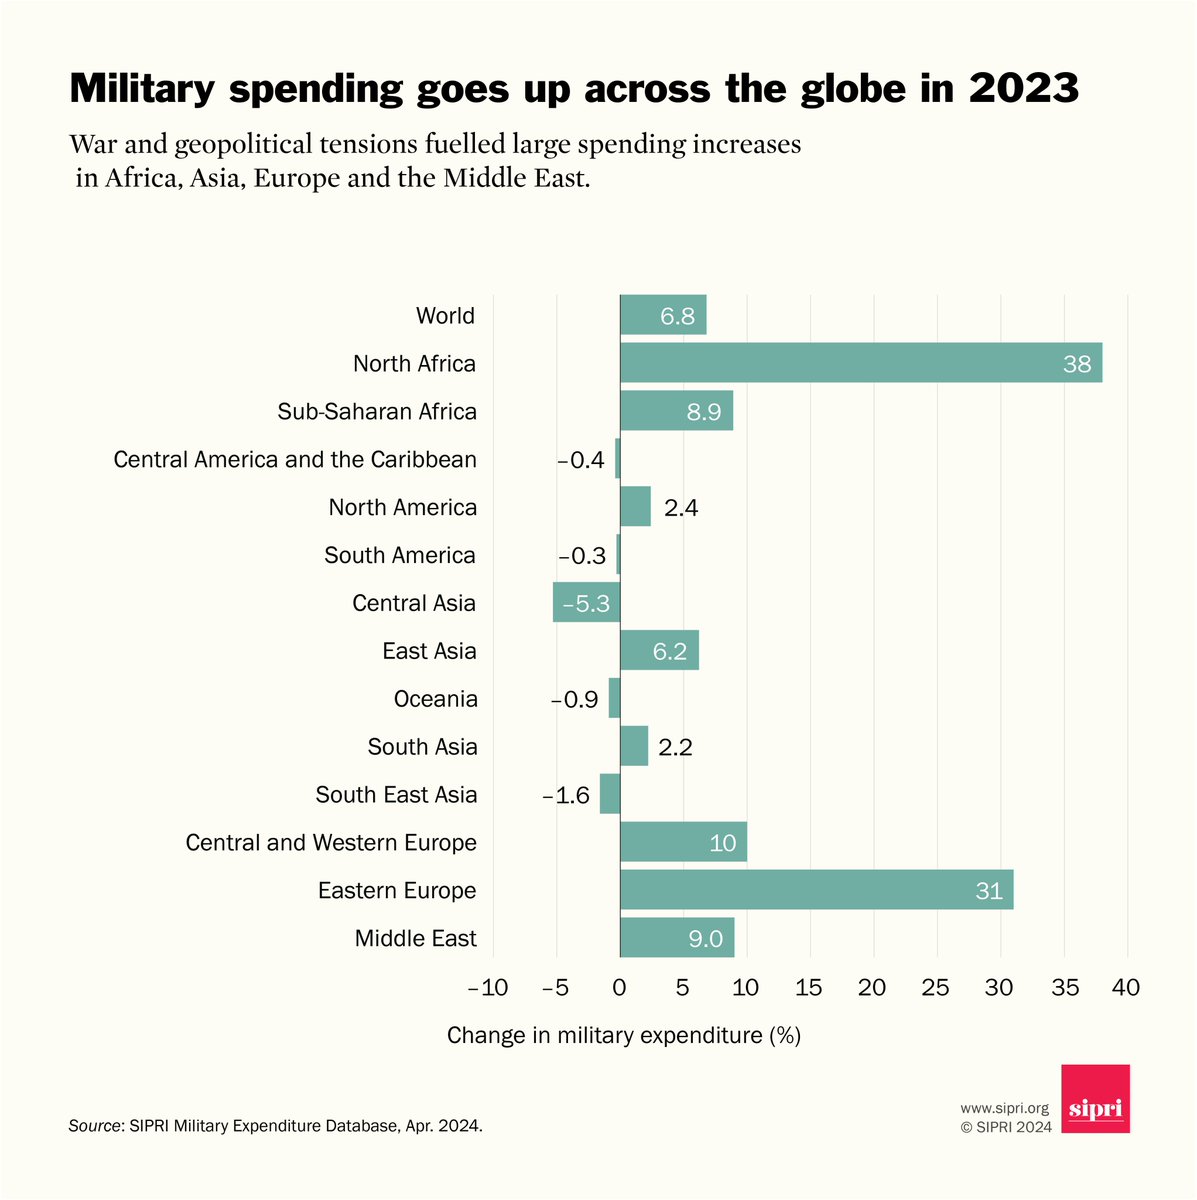 Estimated #MilitaryExpenditure in the #MiddleEast increased by 9.0% to $200 billion in 2023. This was the highest annual growth rate in the region seen in the past decade. Full analysis ➡️ doi.org/10.55163/BQGA2…